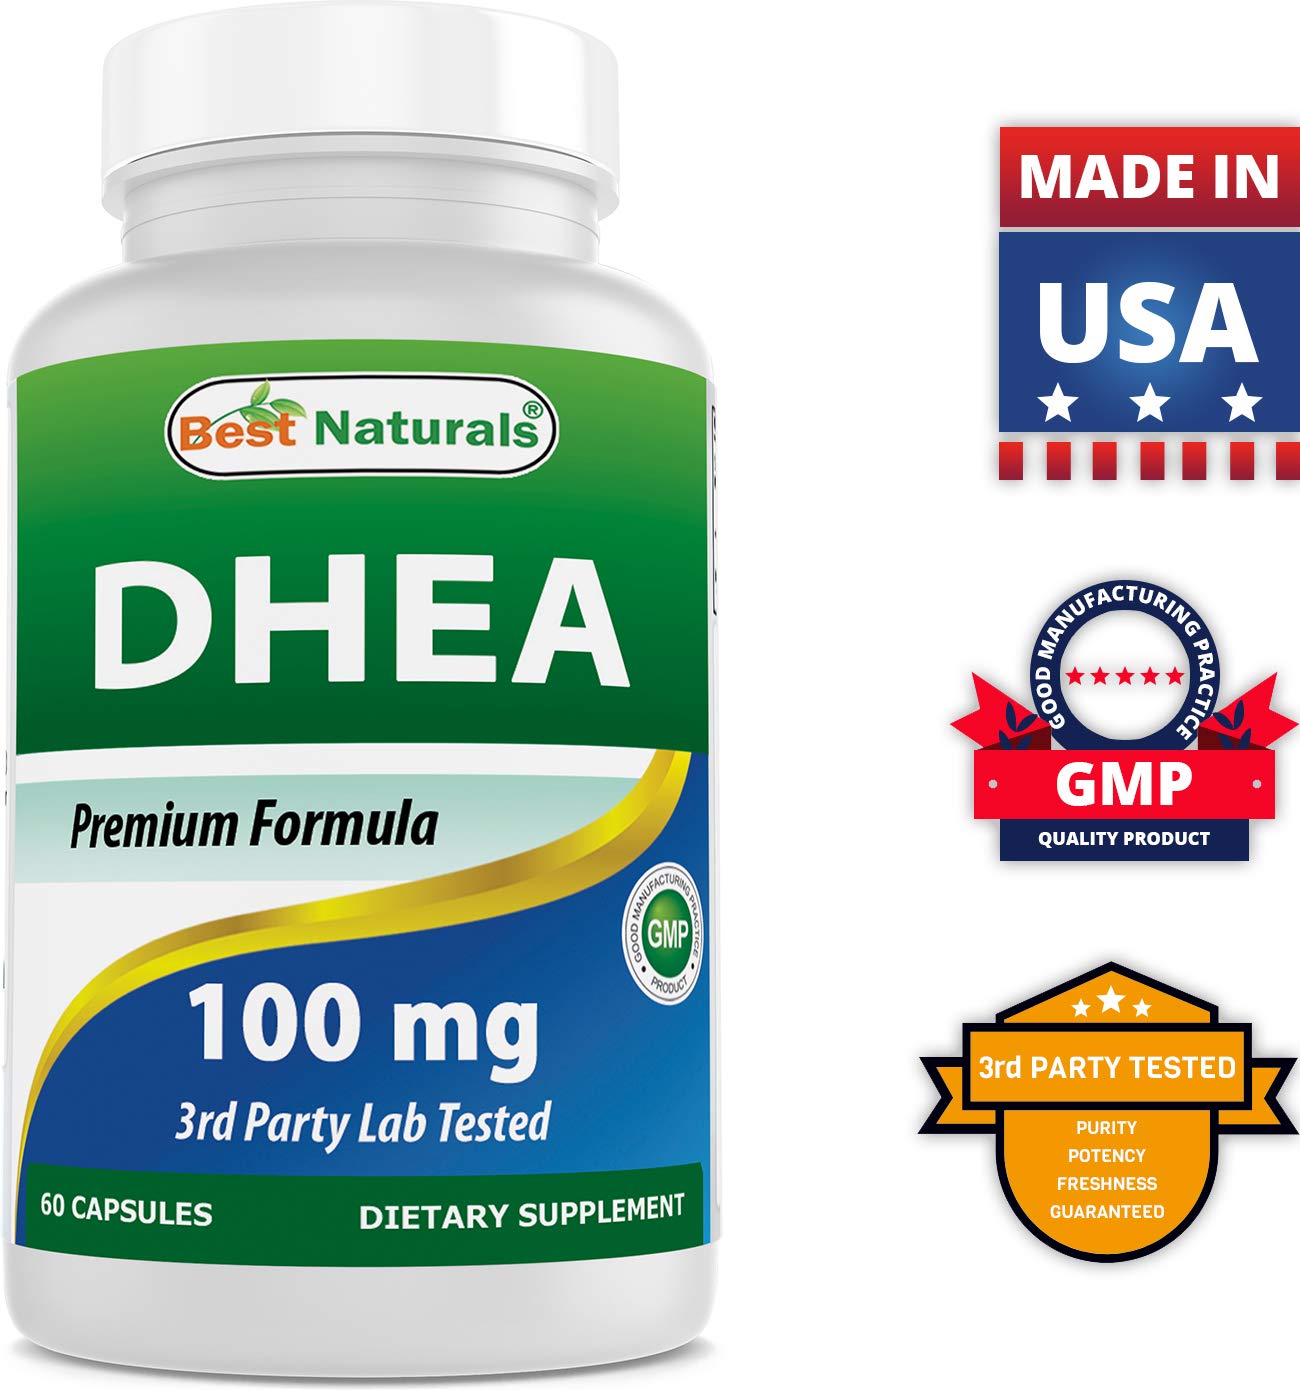 Best Naturals DHEA 100mg & Hyaluronic Acid 200 mg